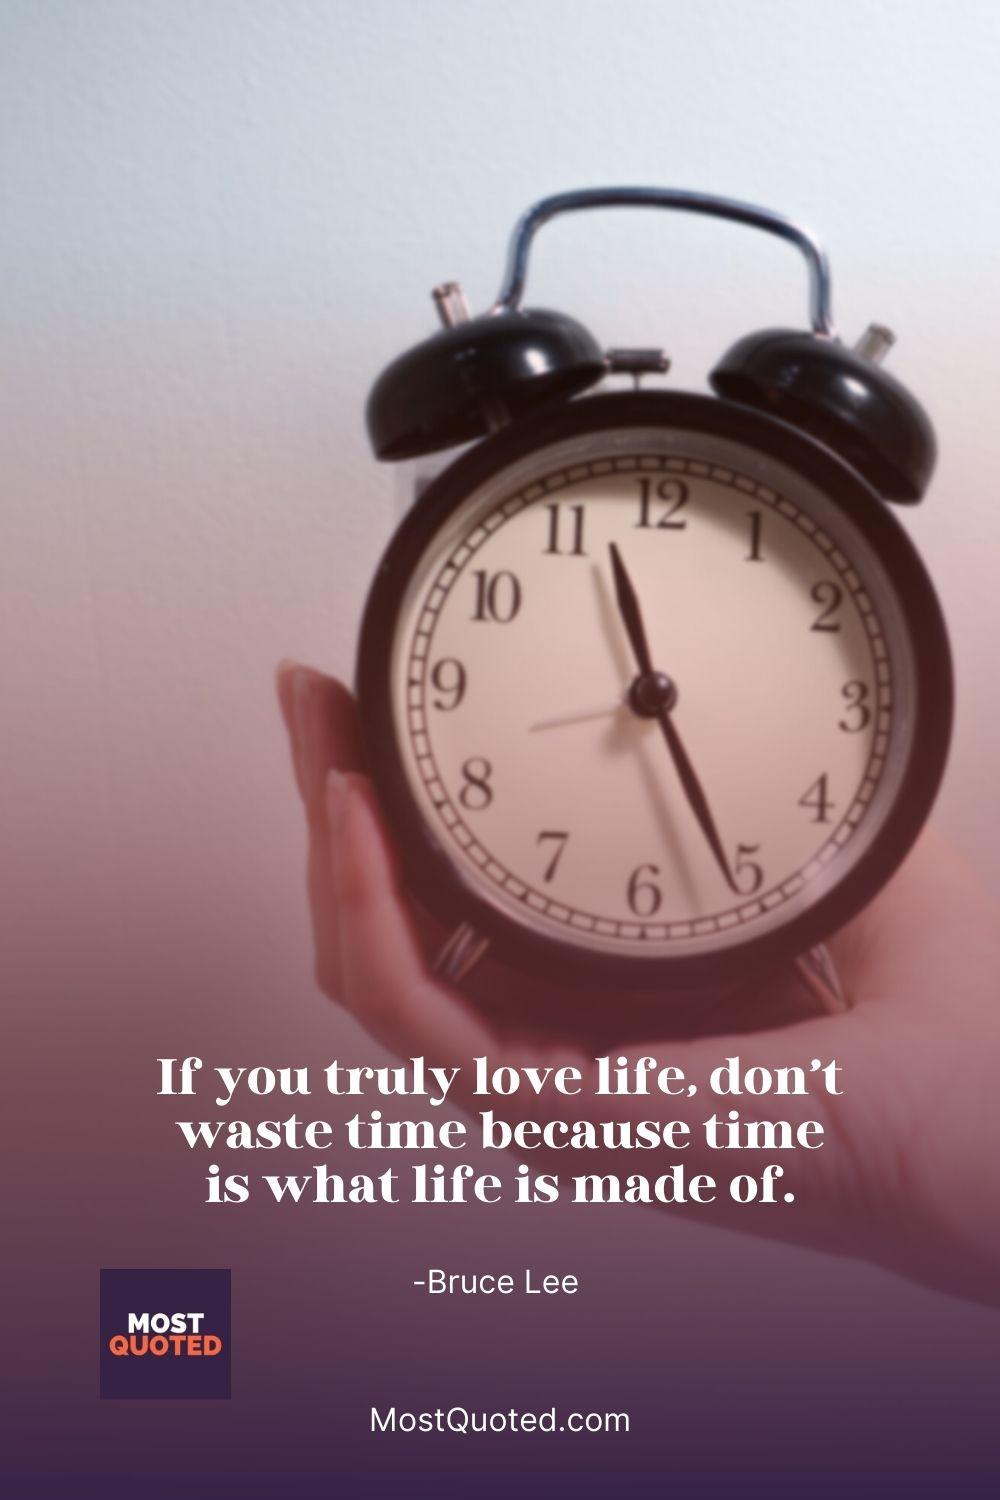 If you truly love life, don’t waste time because time is what life is made of. - Bruce Lee